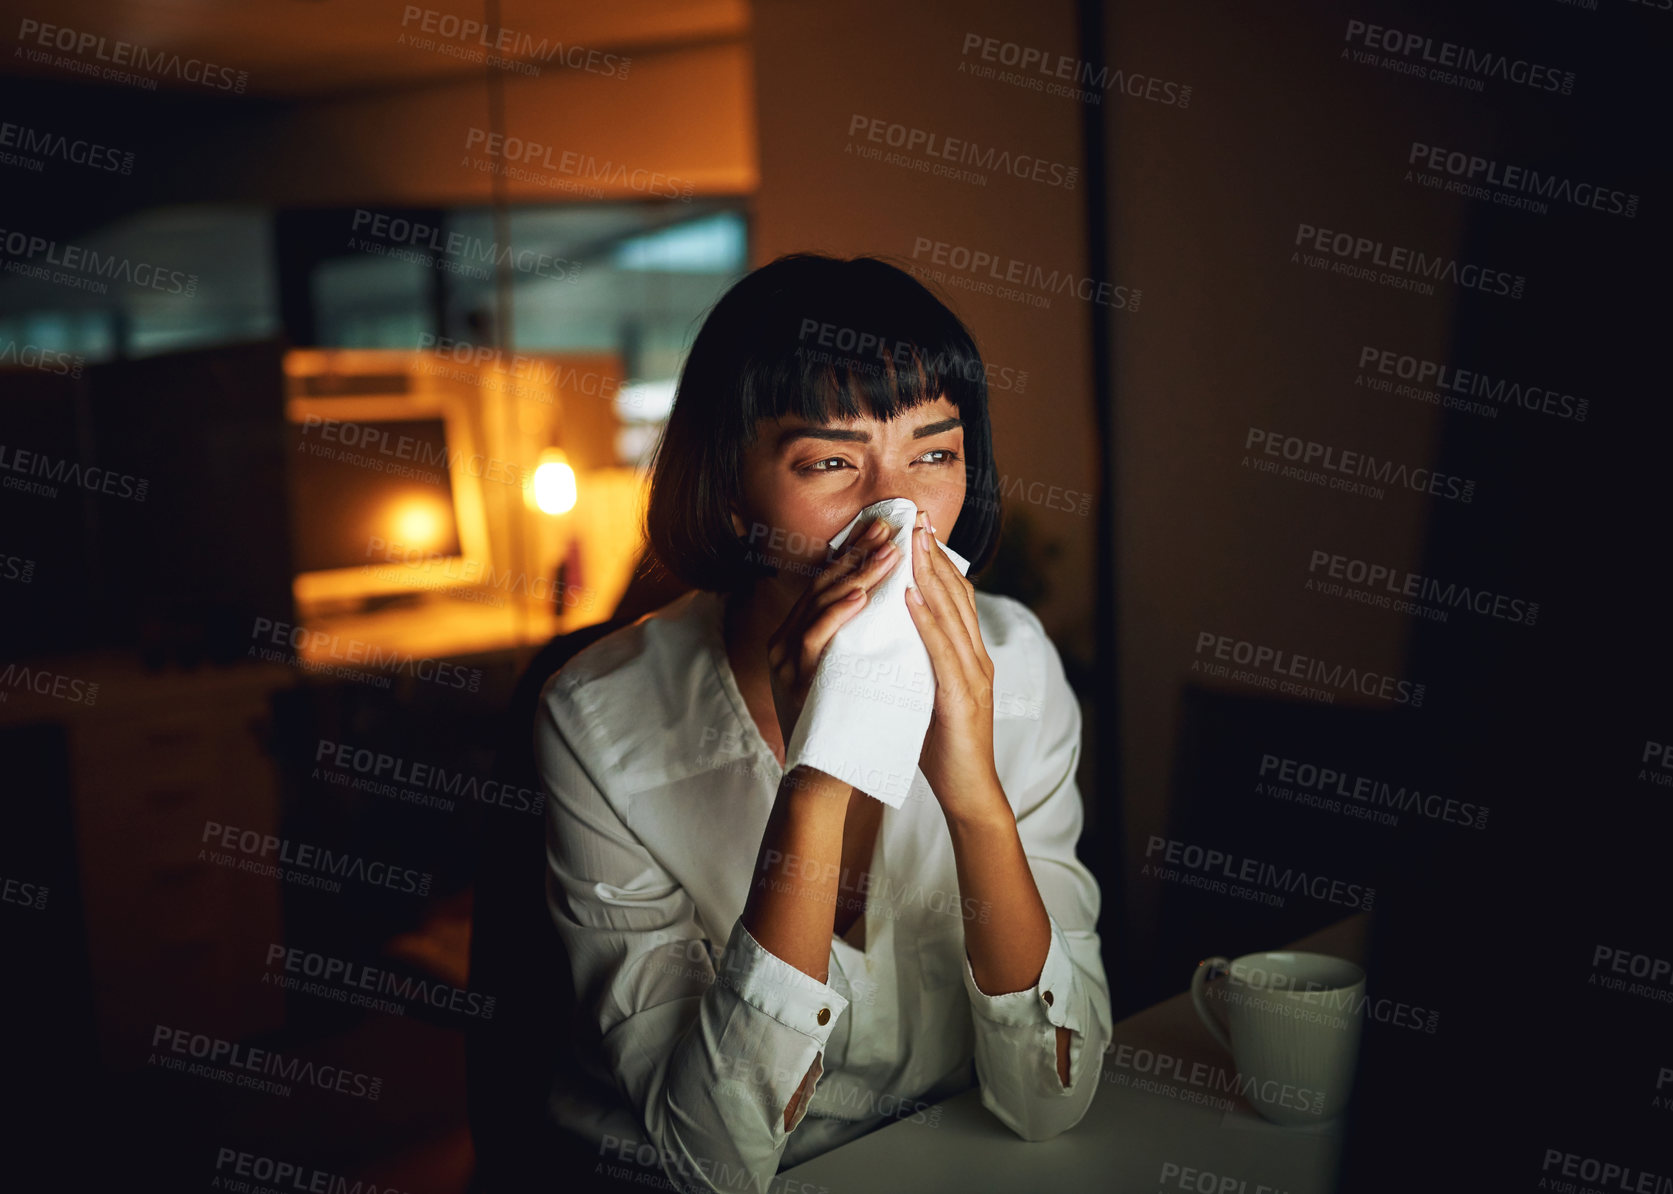 Buy stock photo Shot of a young businesswoman blowing her nose during a late night at work